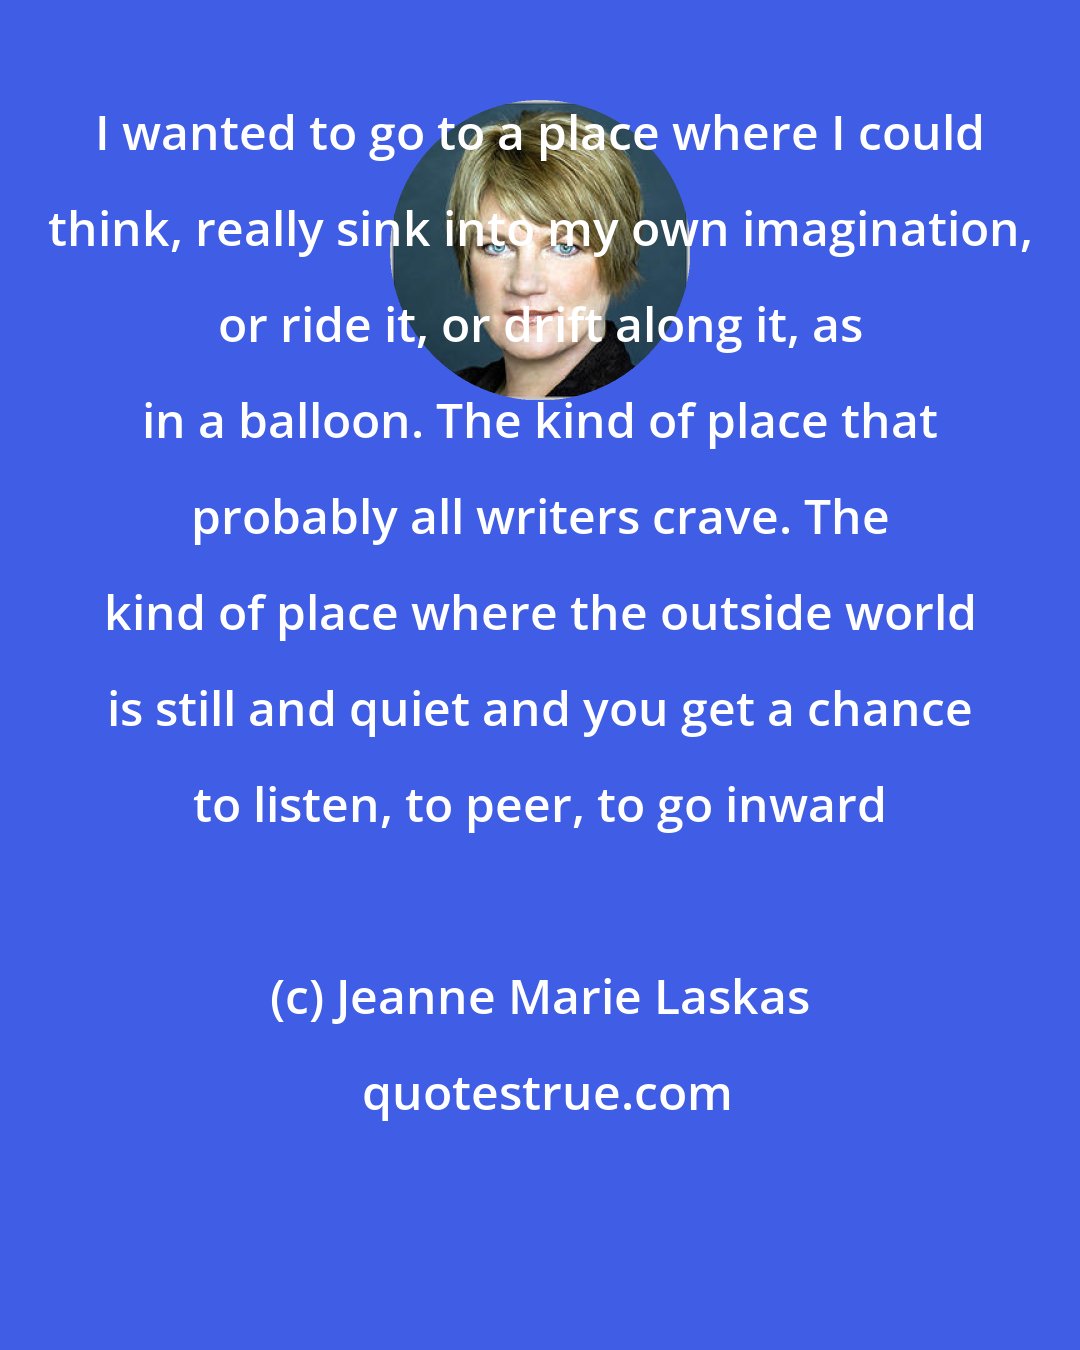 Jeanne Marie Laskas: I wanted to go to a place where I could think, really sink into my own imagination, or ride it, or drift along it, as in a balloon. The kind of place that probably all writers crave. The kind of place where the outside world is still and quiet and you get a chance to listen, to peer, to go inward